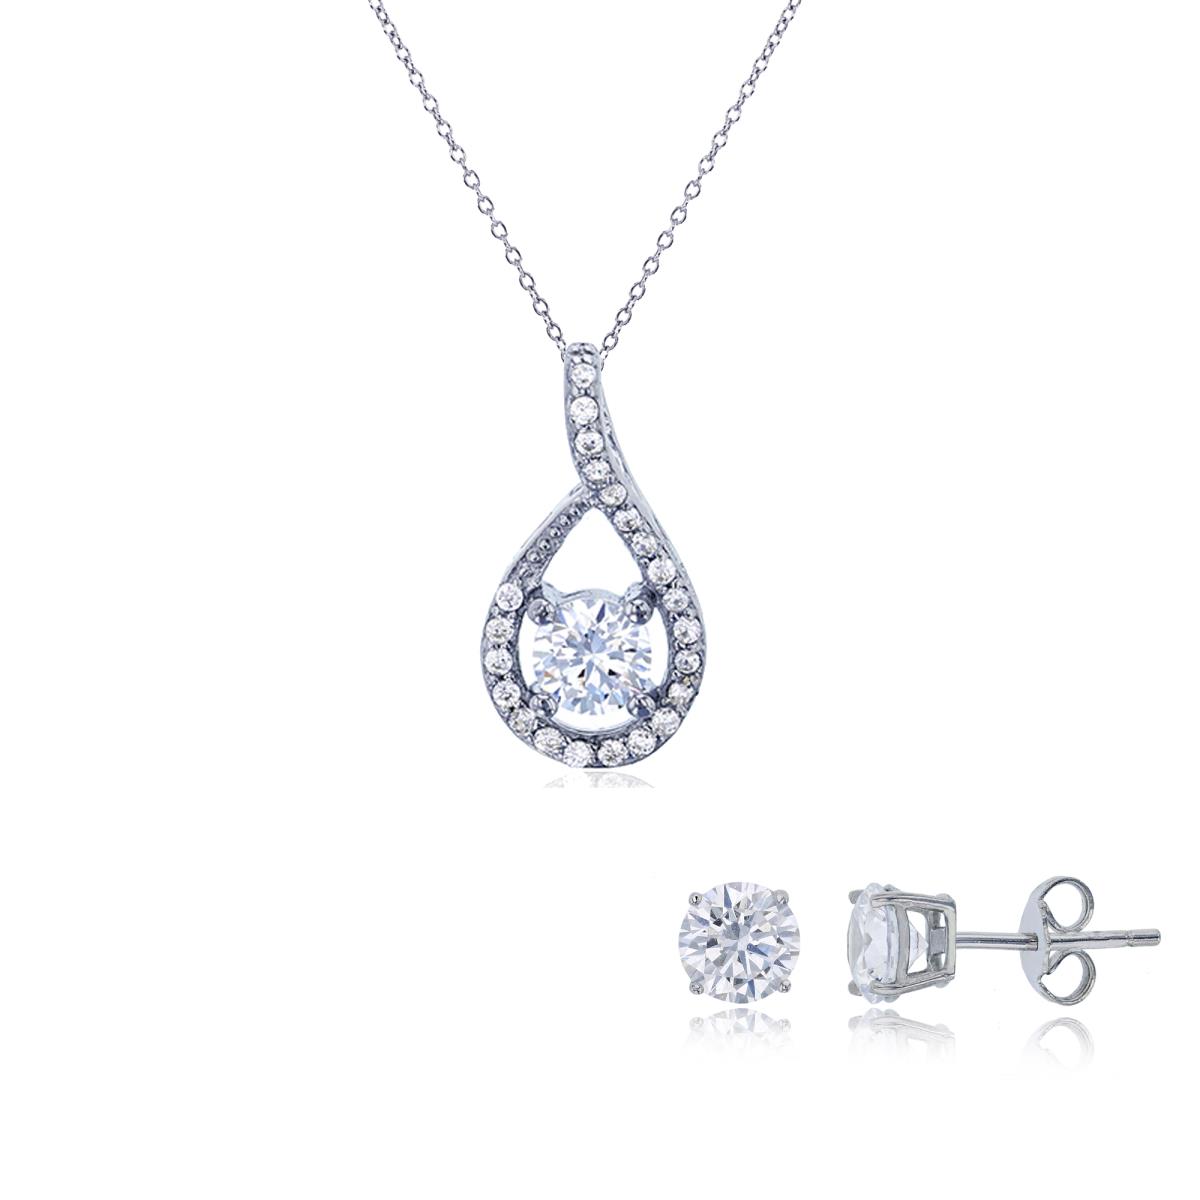 Sterling Silver Rhodium 5mm Round CZ Tear Drop 18" Necklace & 6mm Rd Solitaire Stud Earring Set